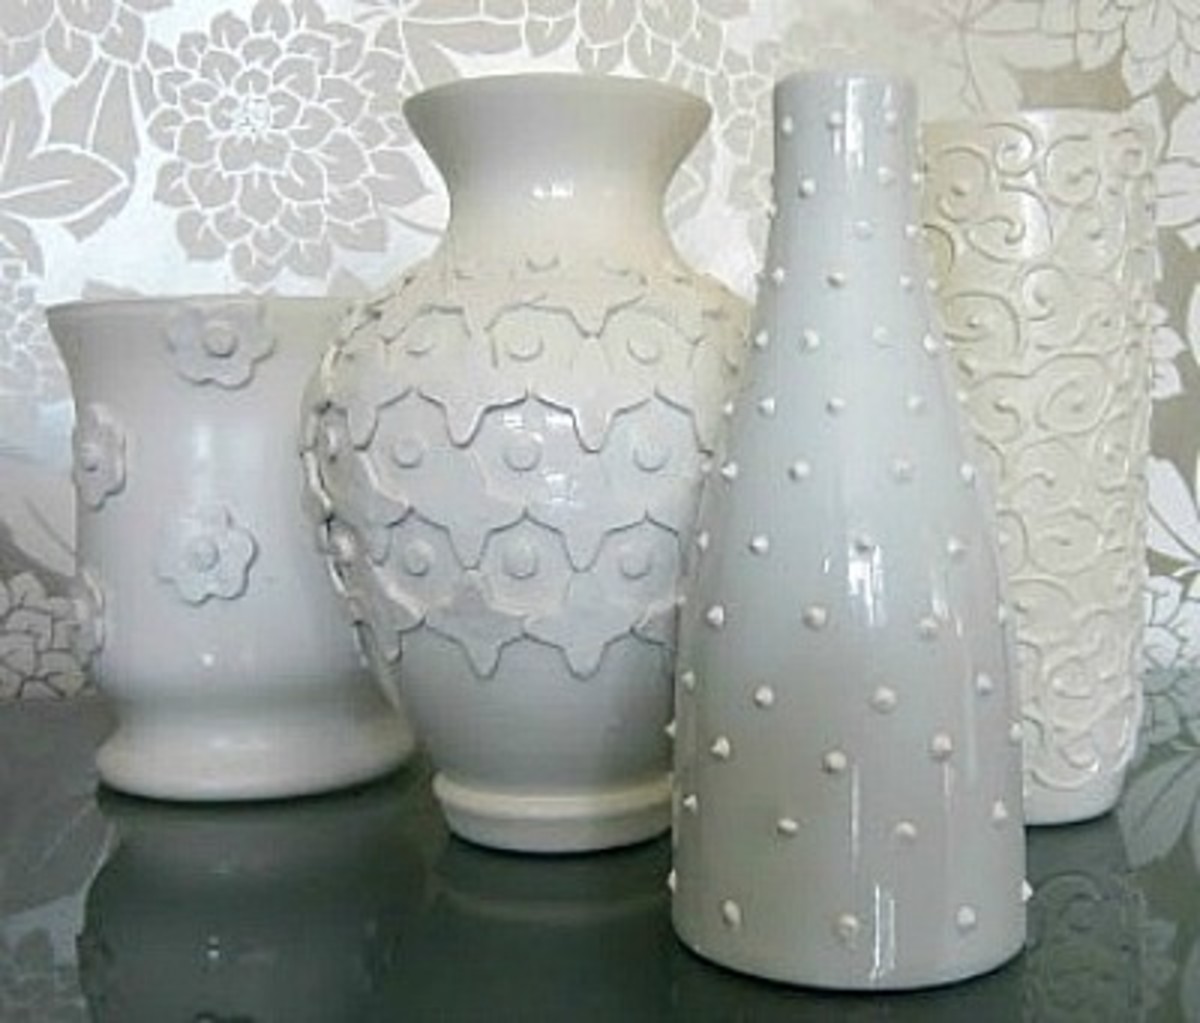 41 Ways to Reuse Old Vases Craft Ideas | HubPages